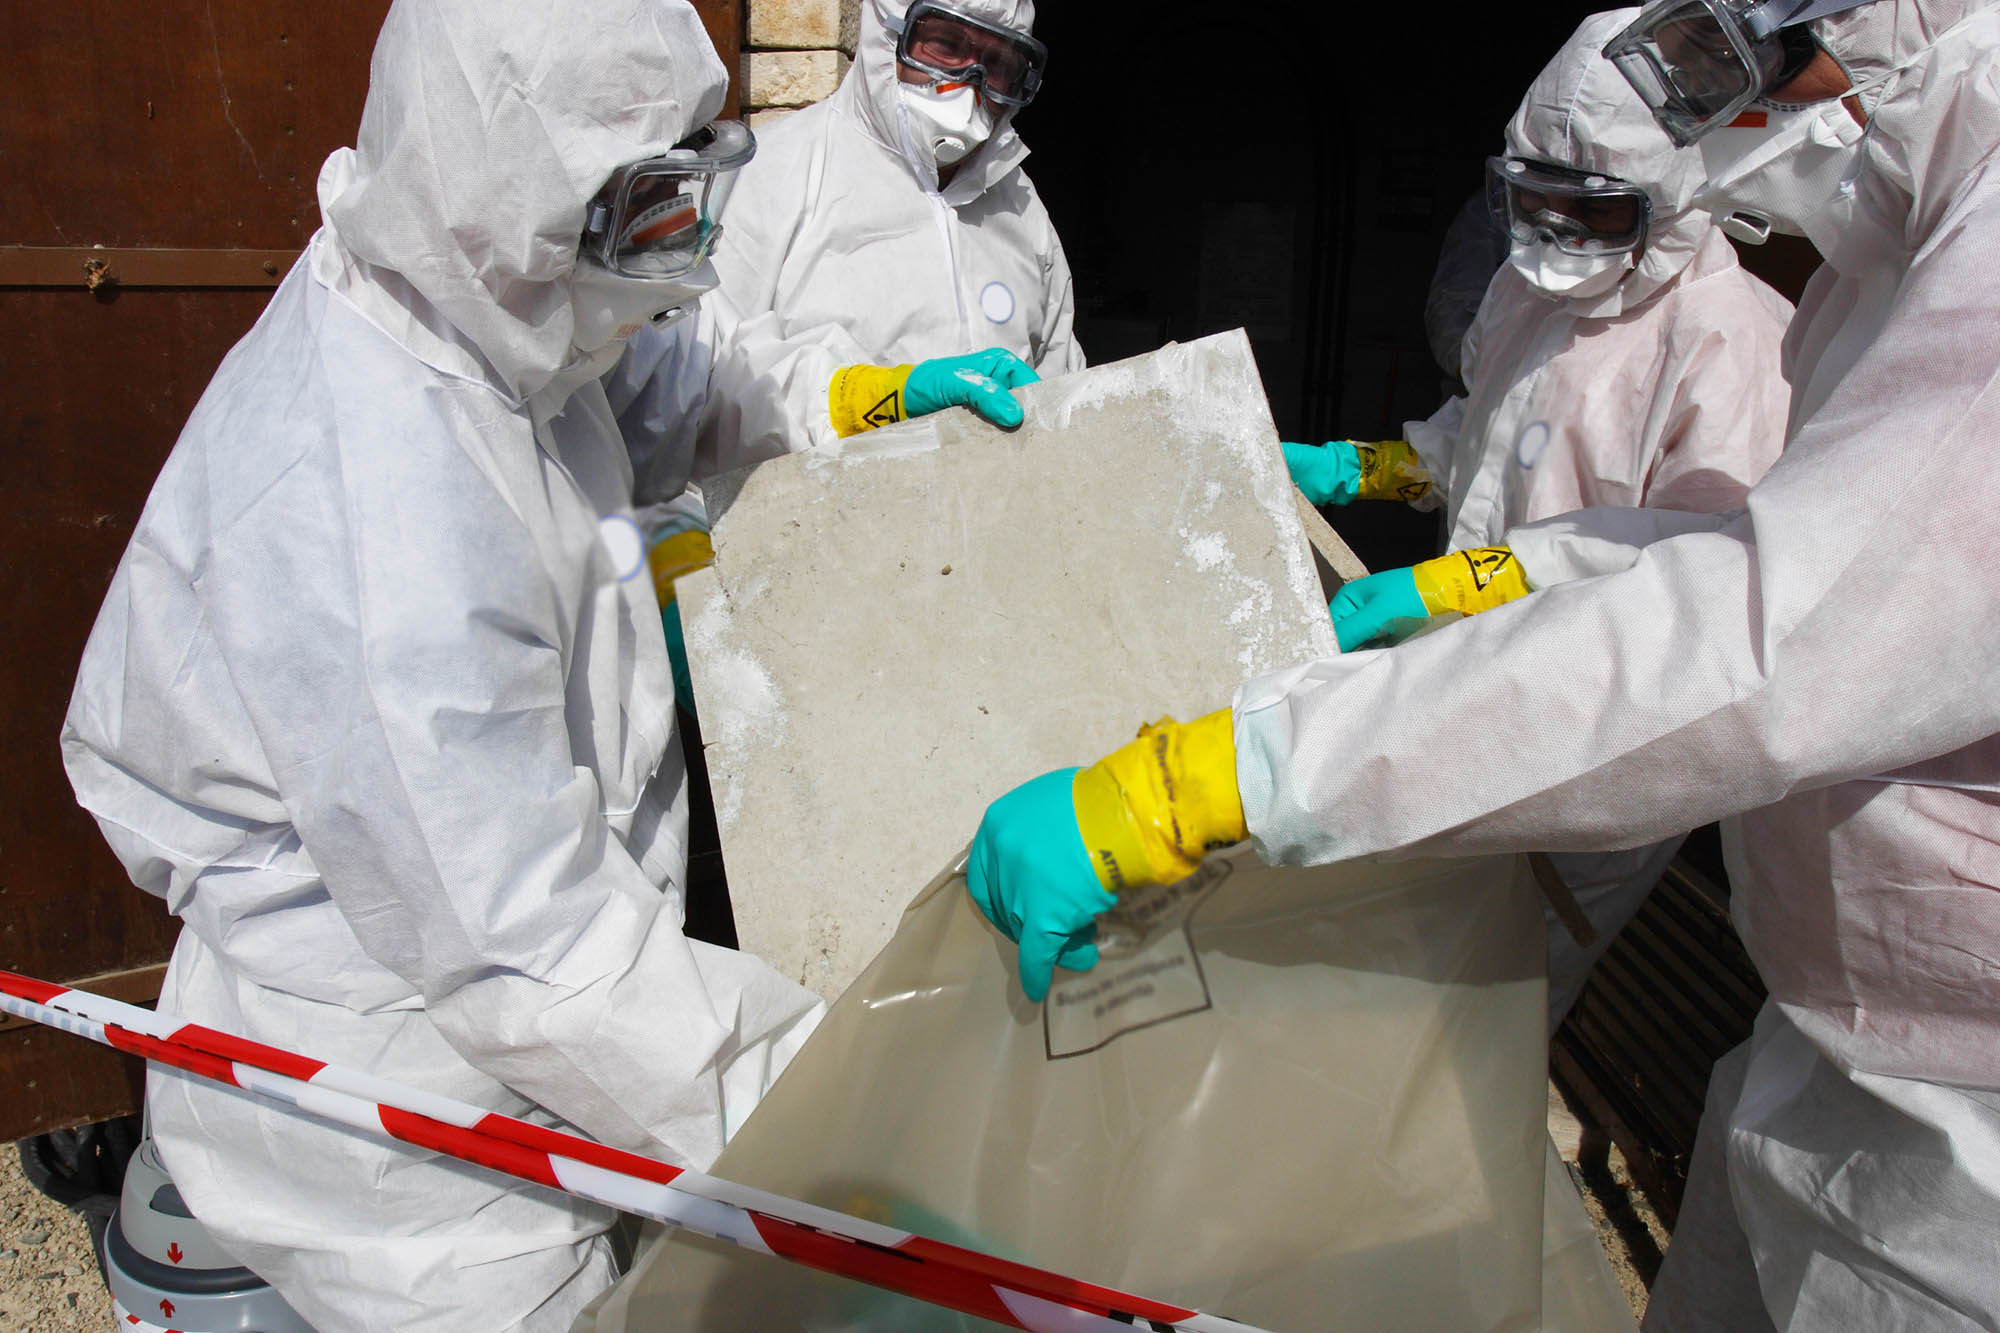 Working with asbestos dangers, employer negligence claims Aberdeen